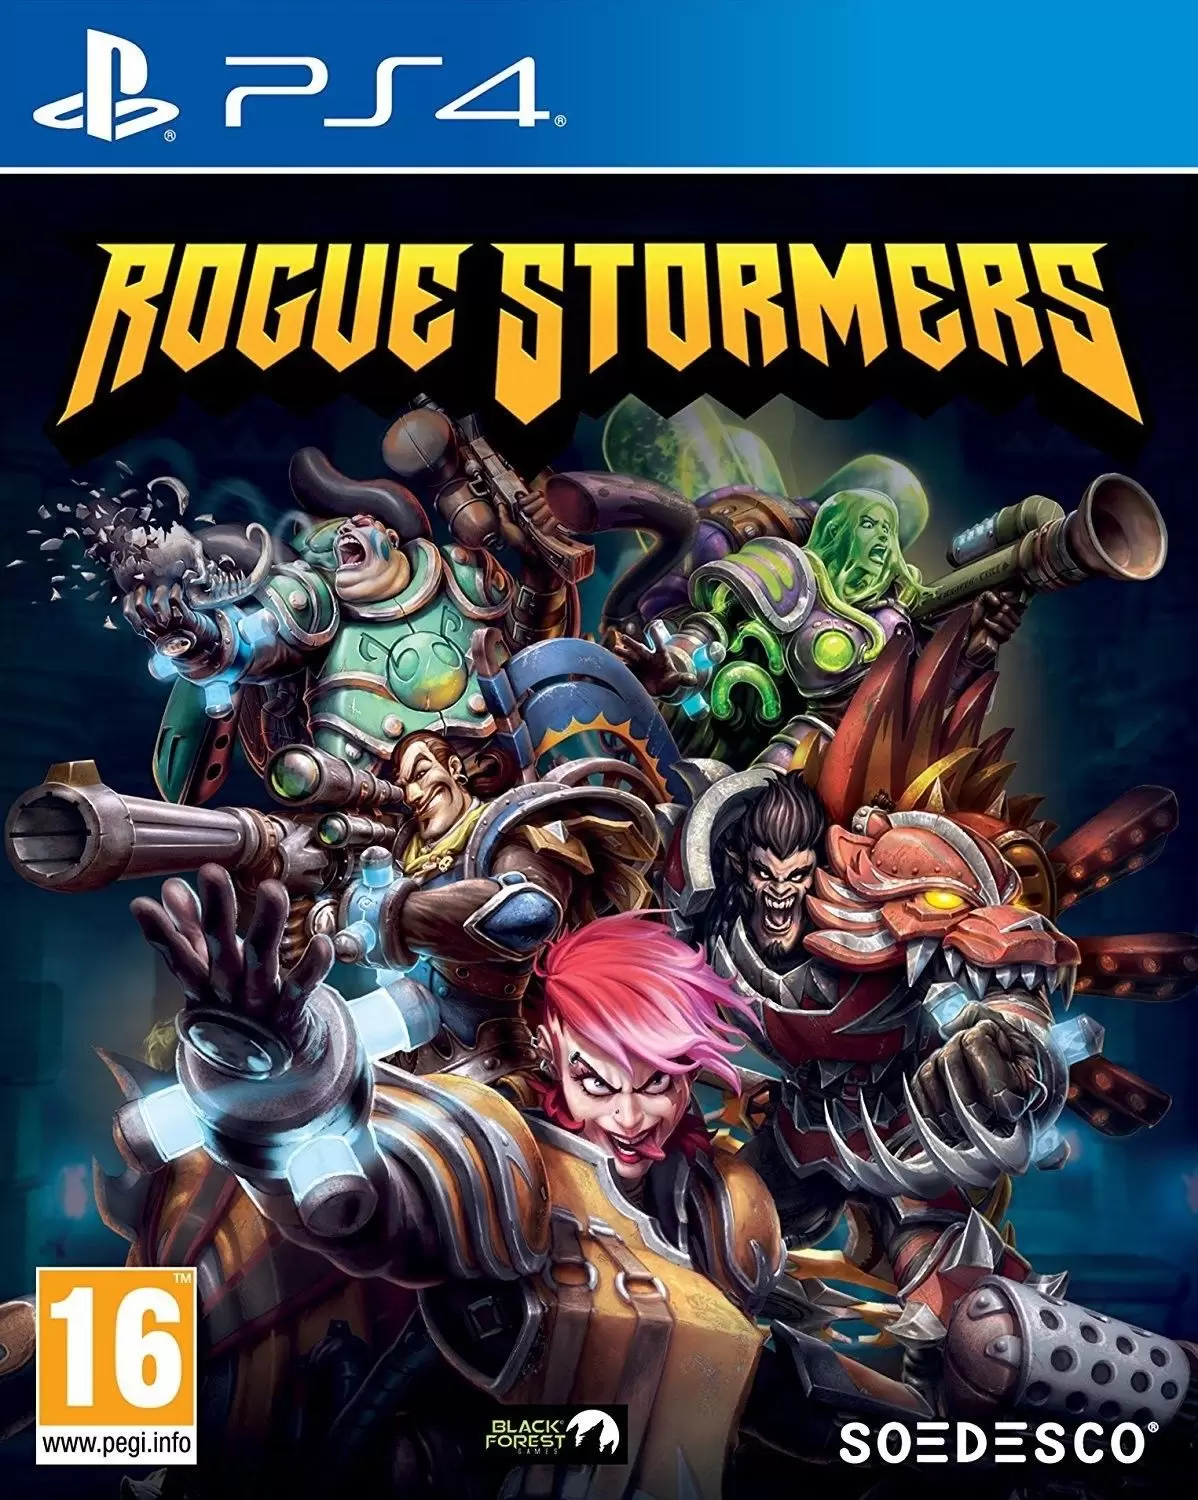 PS4 Games - Rogue Stormers